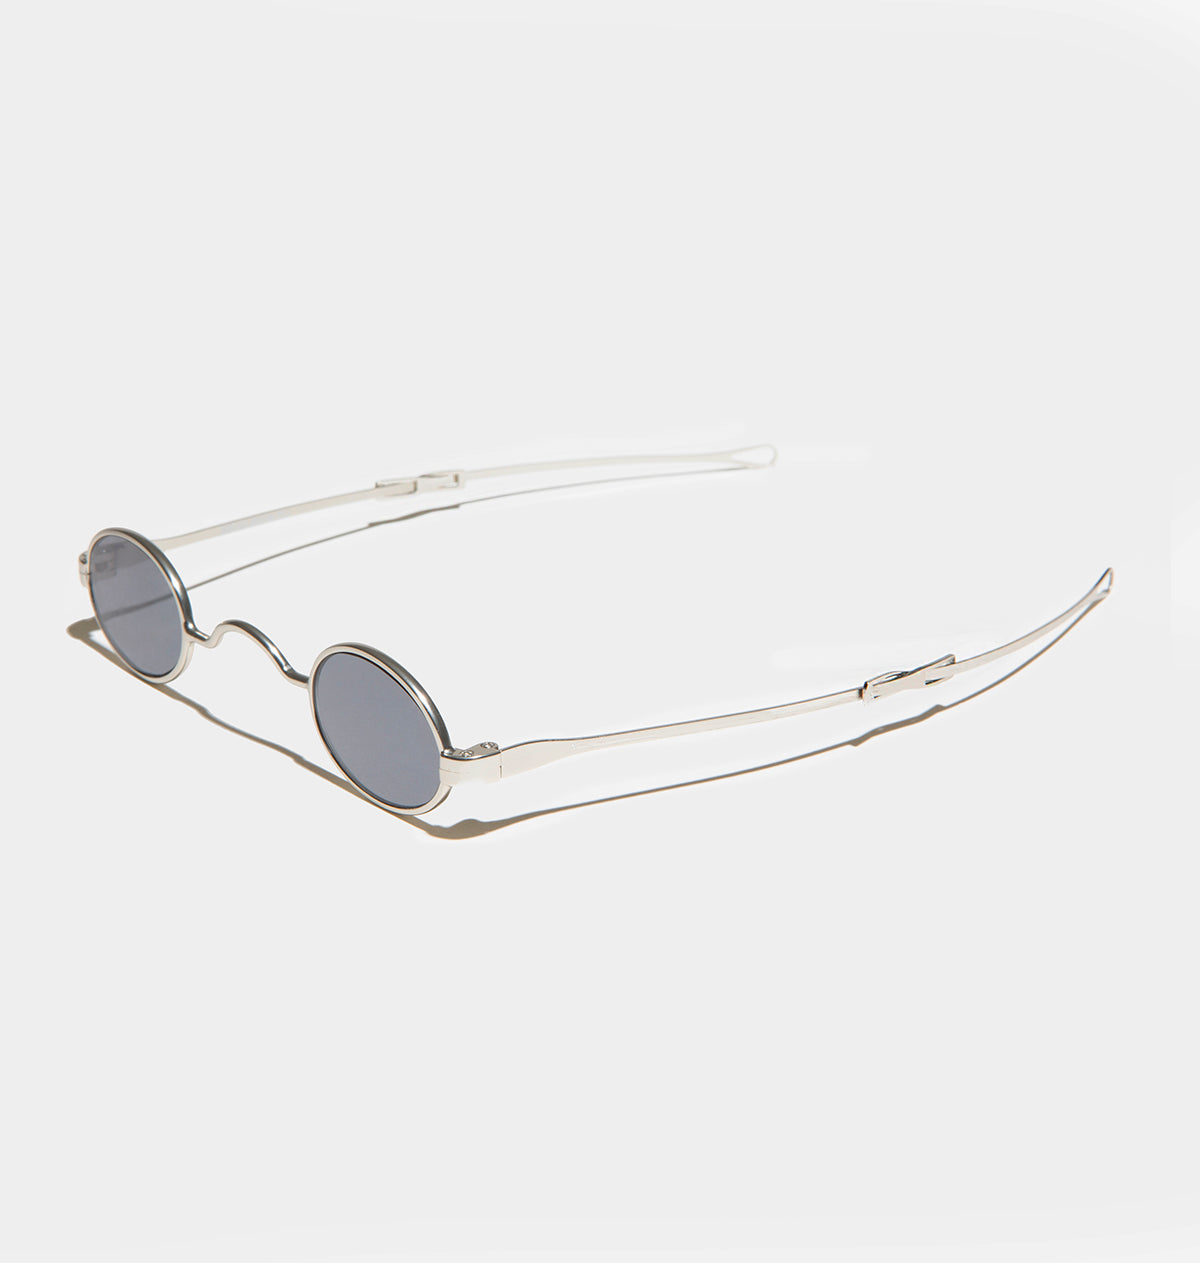 Sliding Temple Tiny Oval Spectacle Sunglass